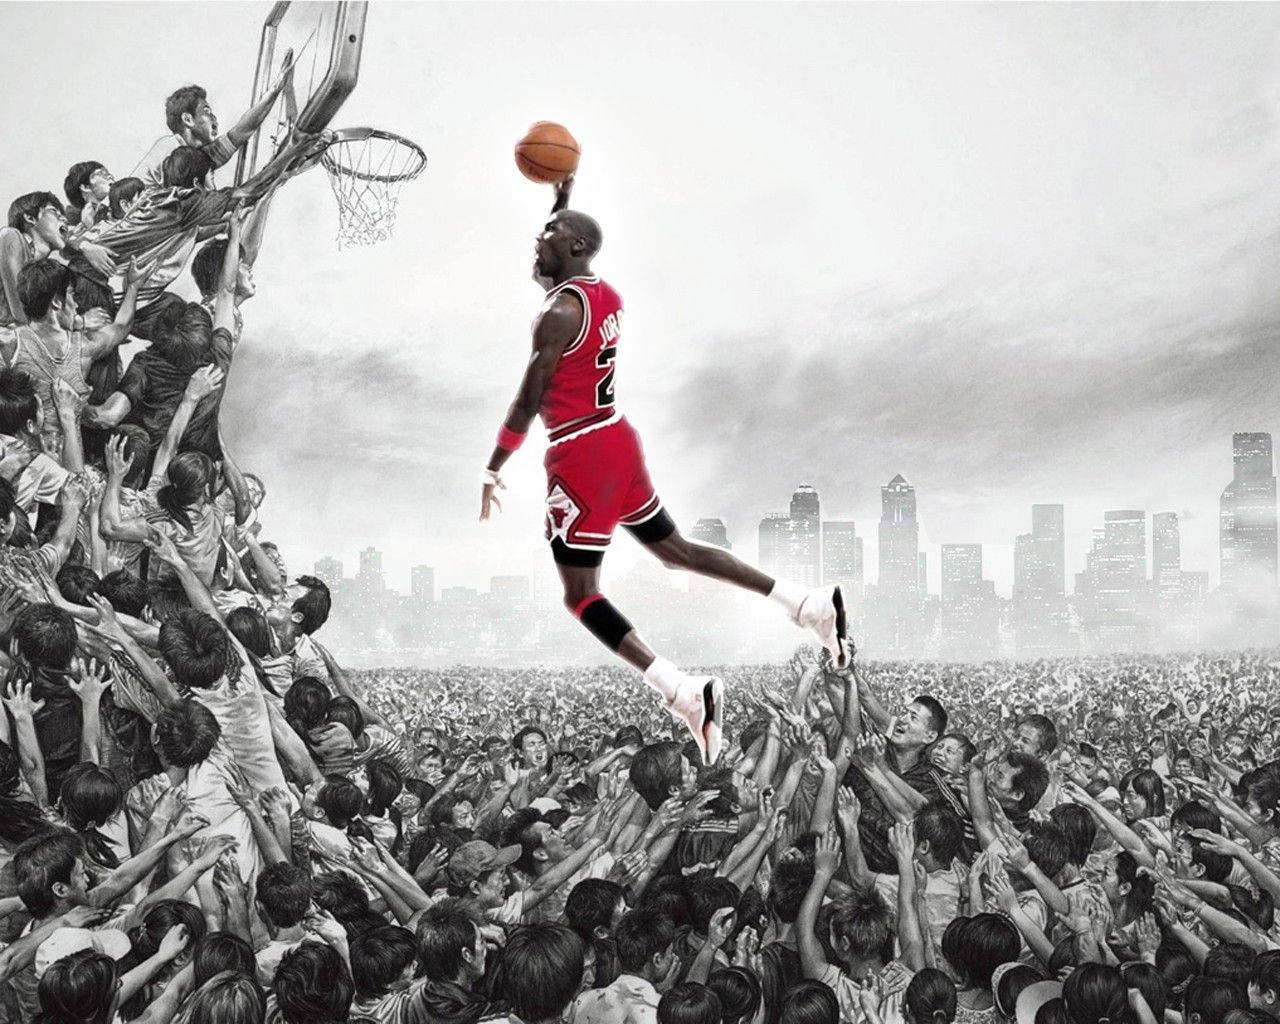 Michael Jordan Flying High Over The Competition